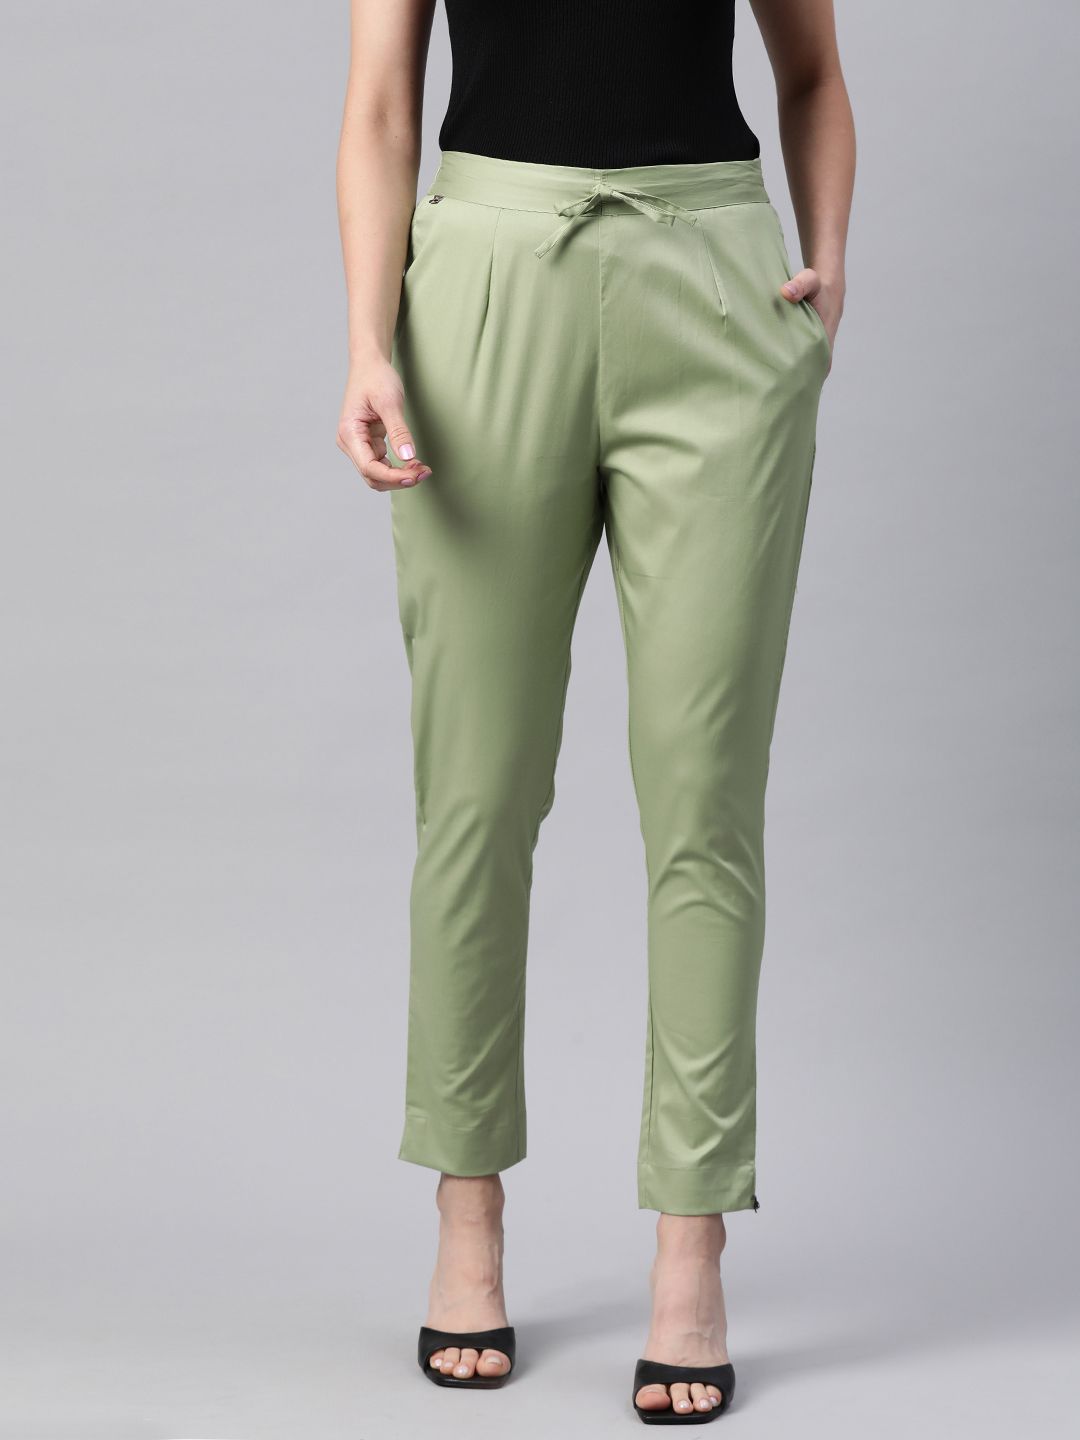 Readiprint Fashions Slim Fit Cigarette Trousers Price in India